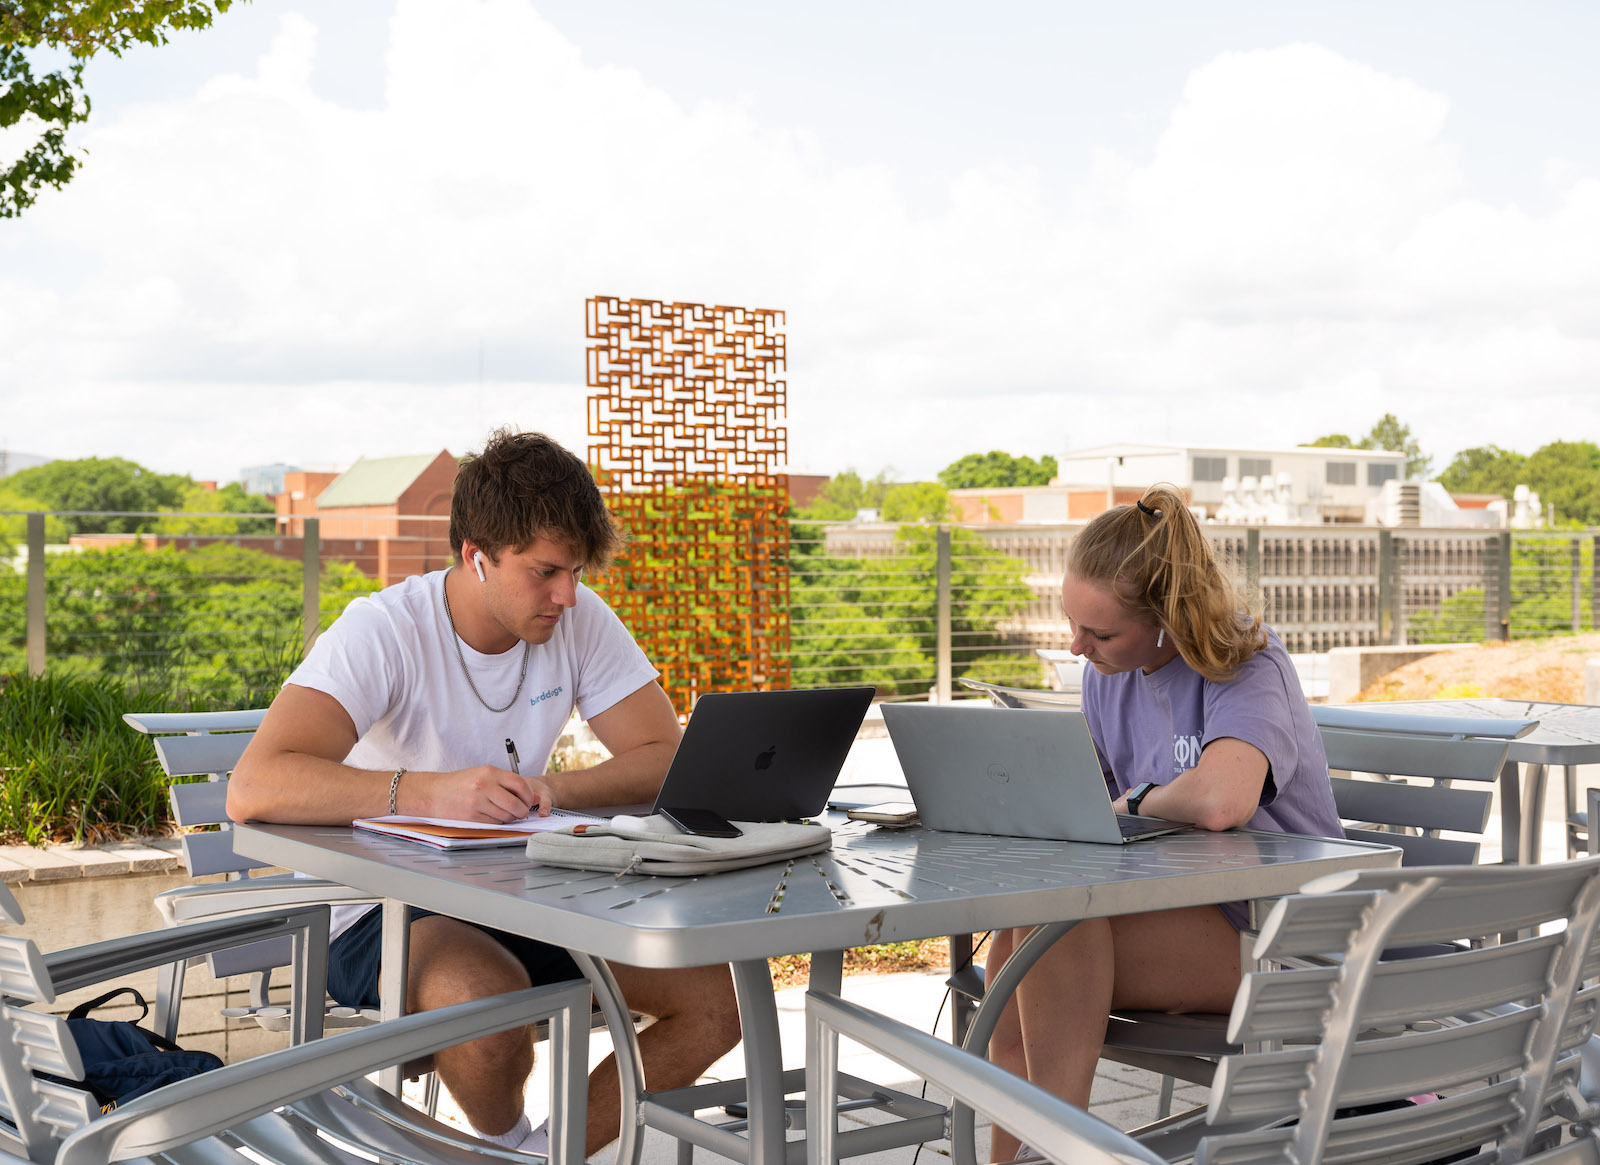 Truman Yardley and Lauren Harris on the roof of Clough Undergraduate Learning Commons.